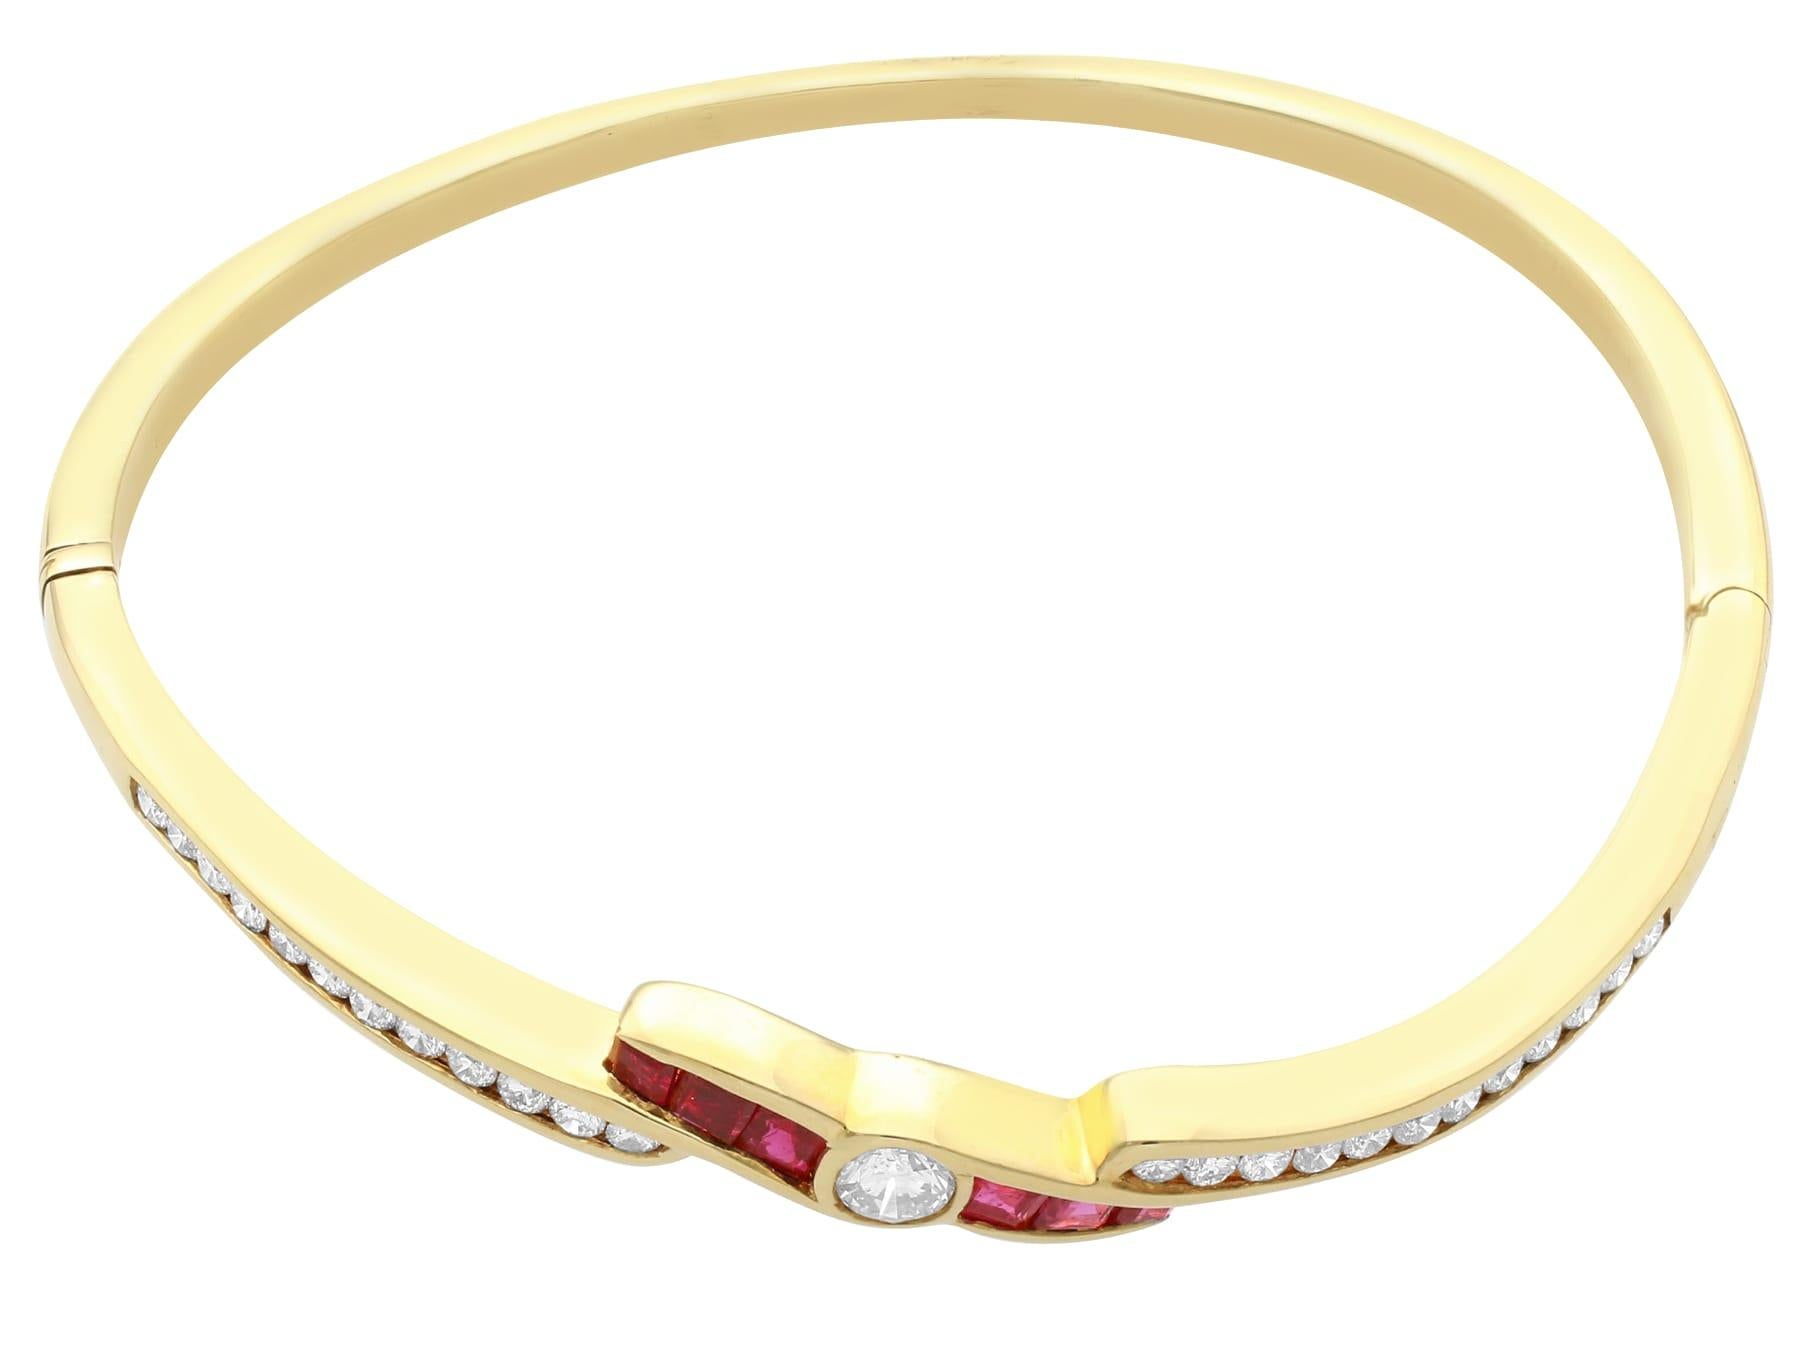 Round Cut 1.50 Carat Ruby and 1.36 Carat Diamond and Yellow Gold Bangle, circa 2010 For Sale